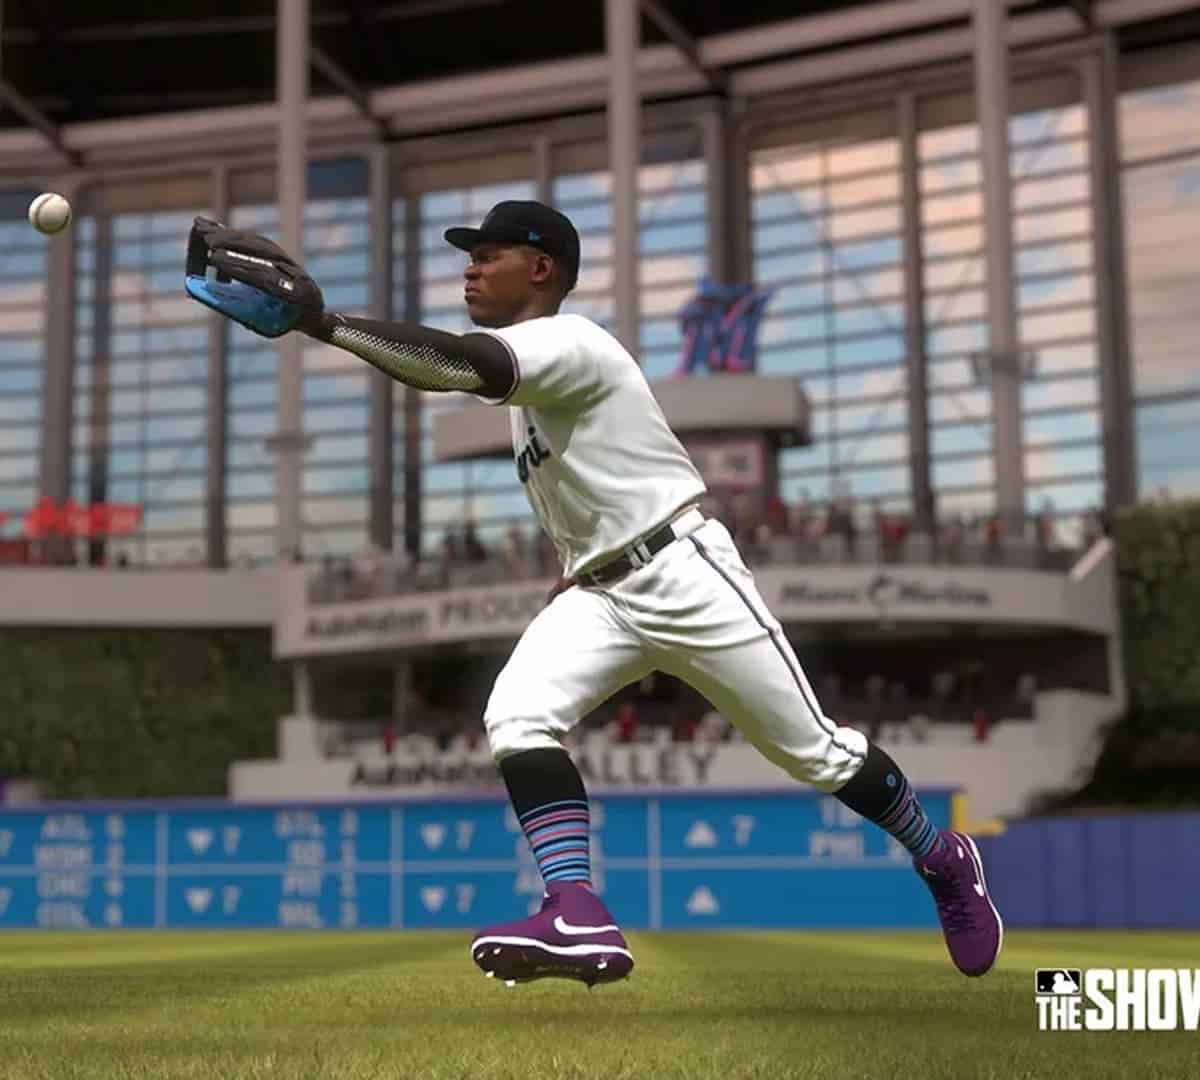 How Big Is MLB The Show 23?